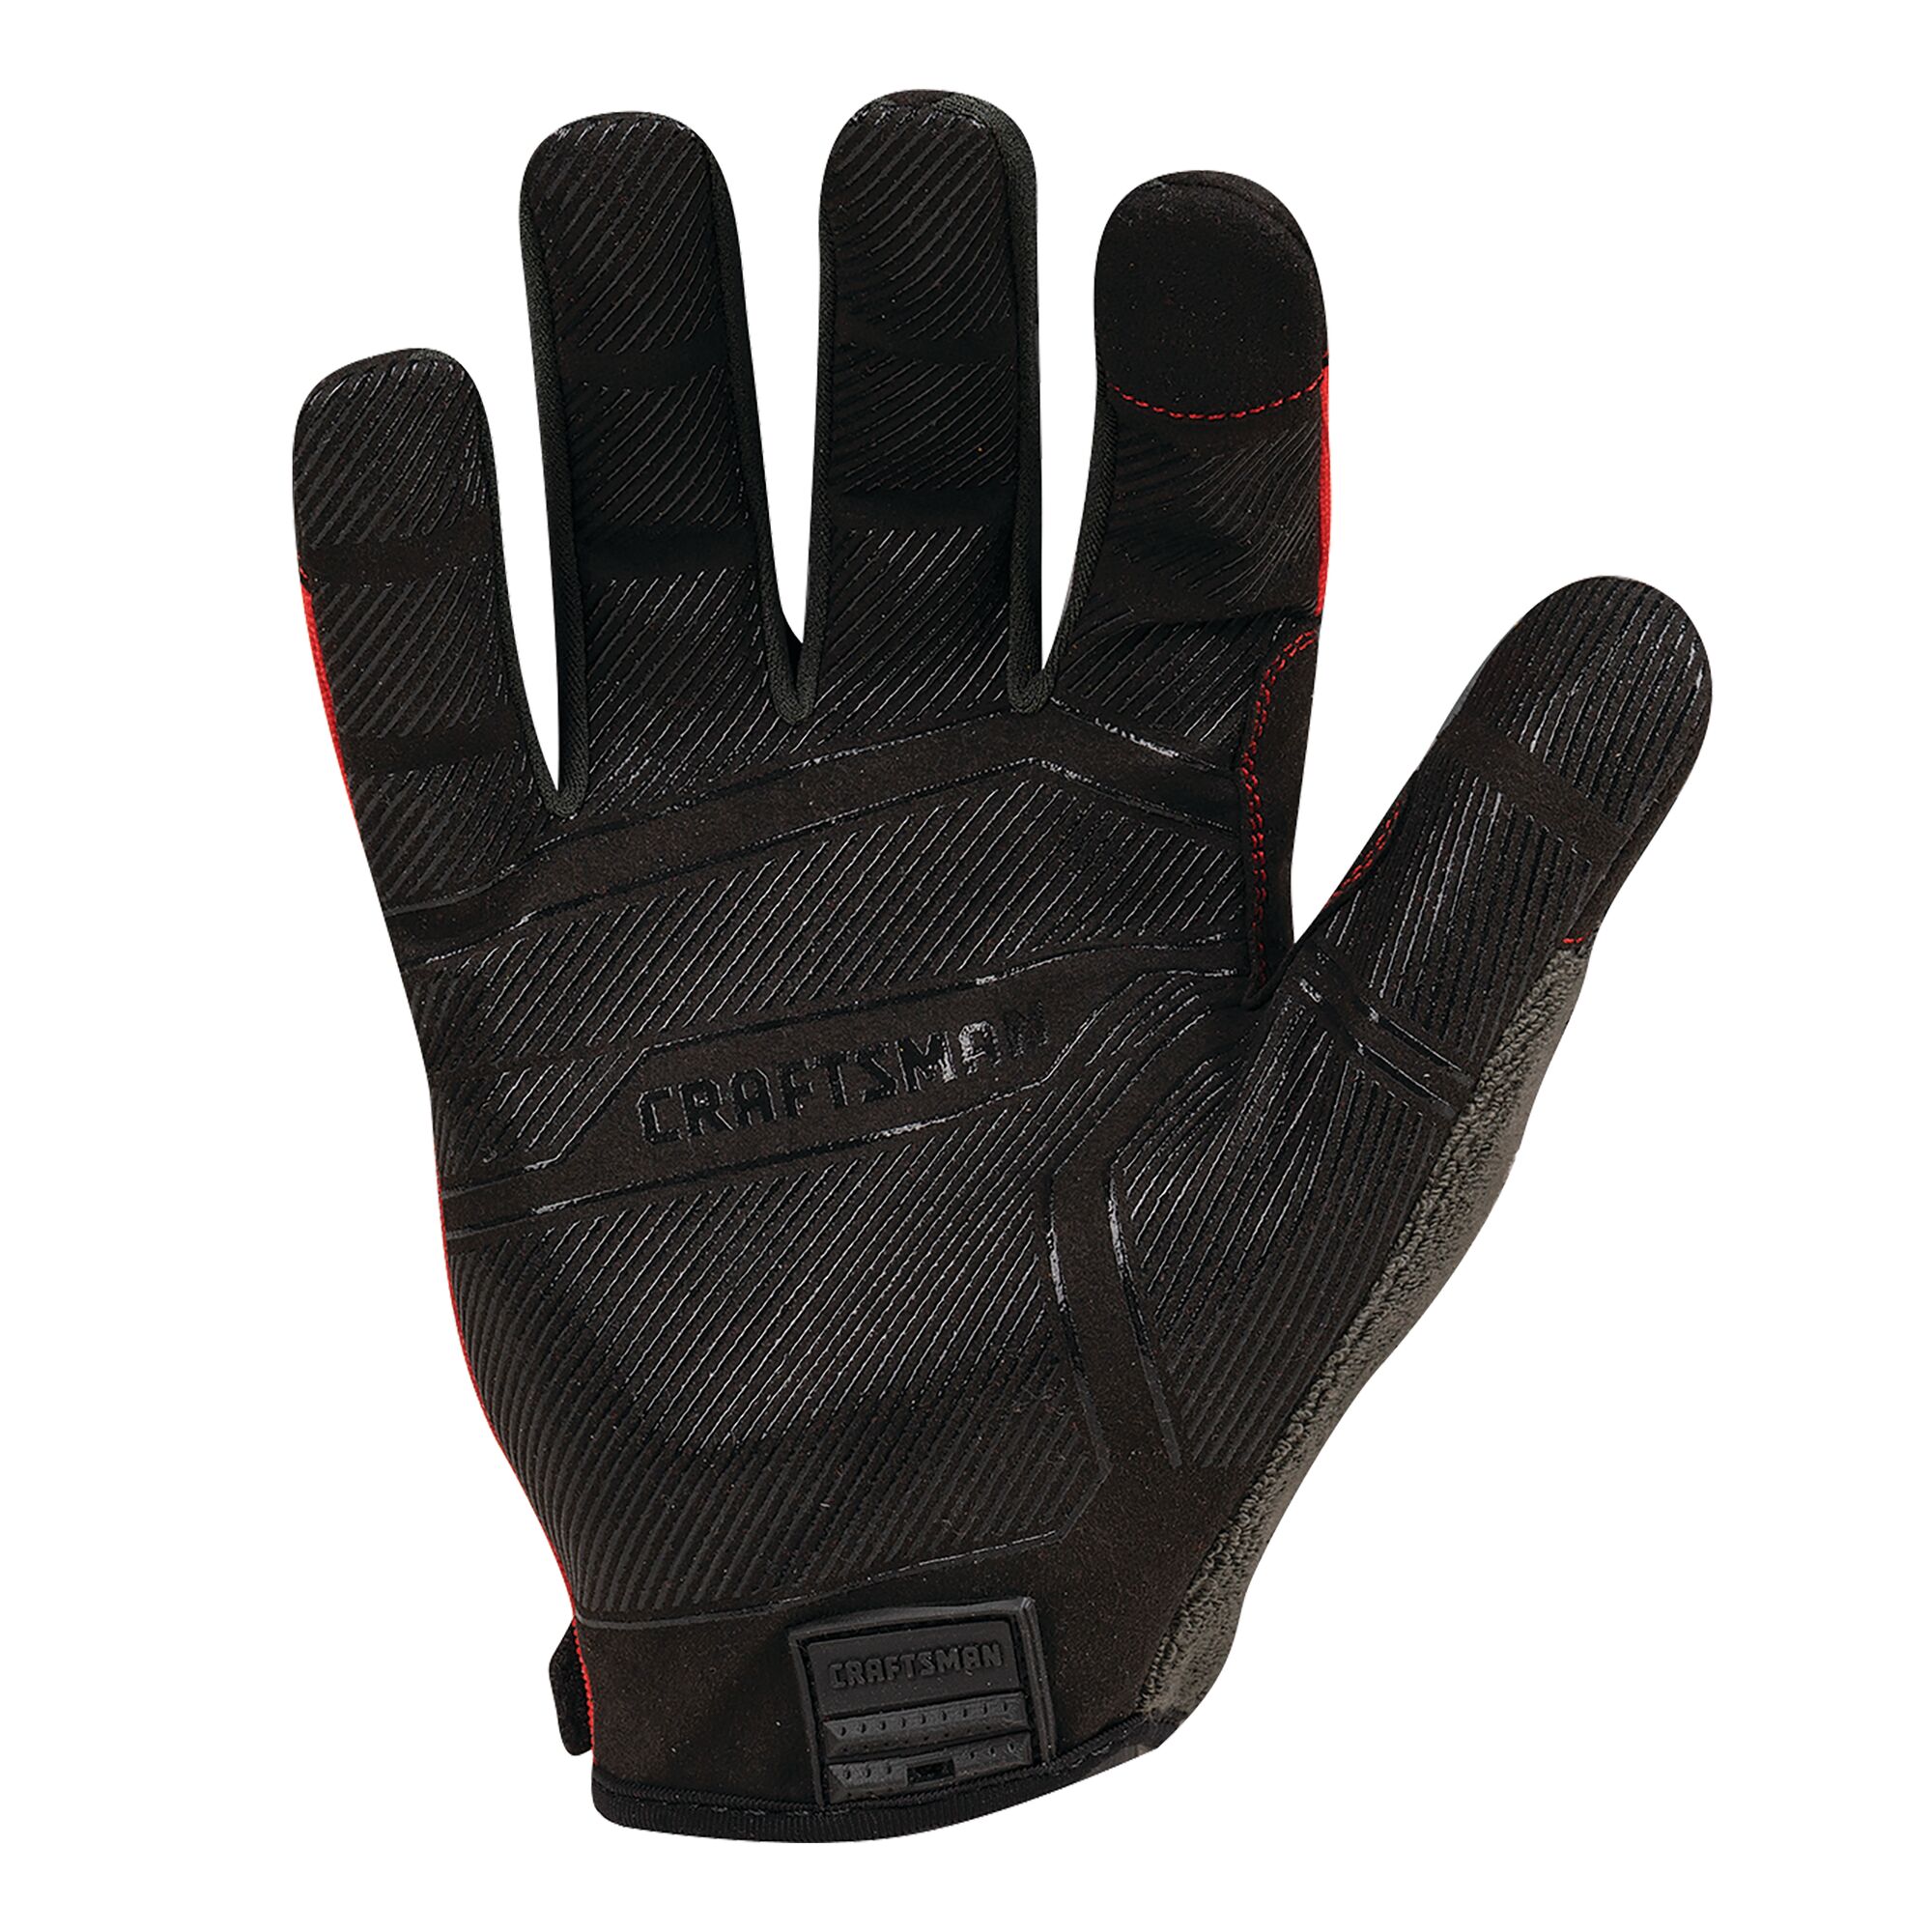 View of CRAFTSMAN Workwear: Gloves & Mitts on white background